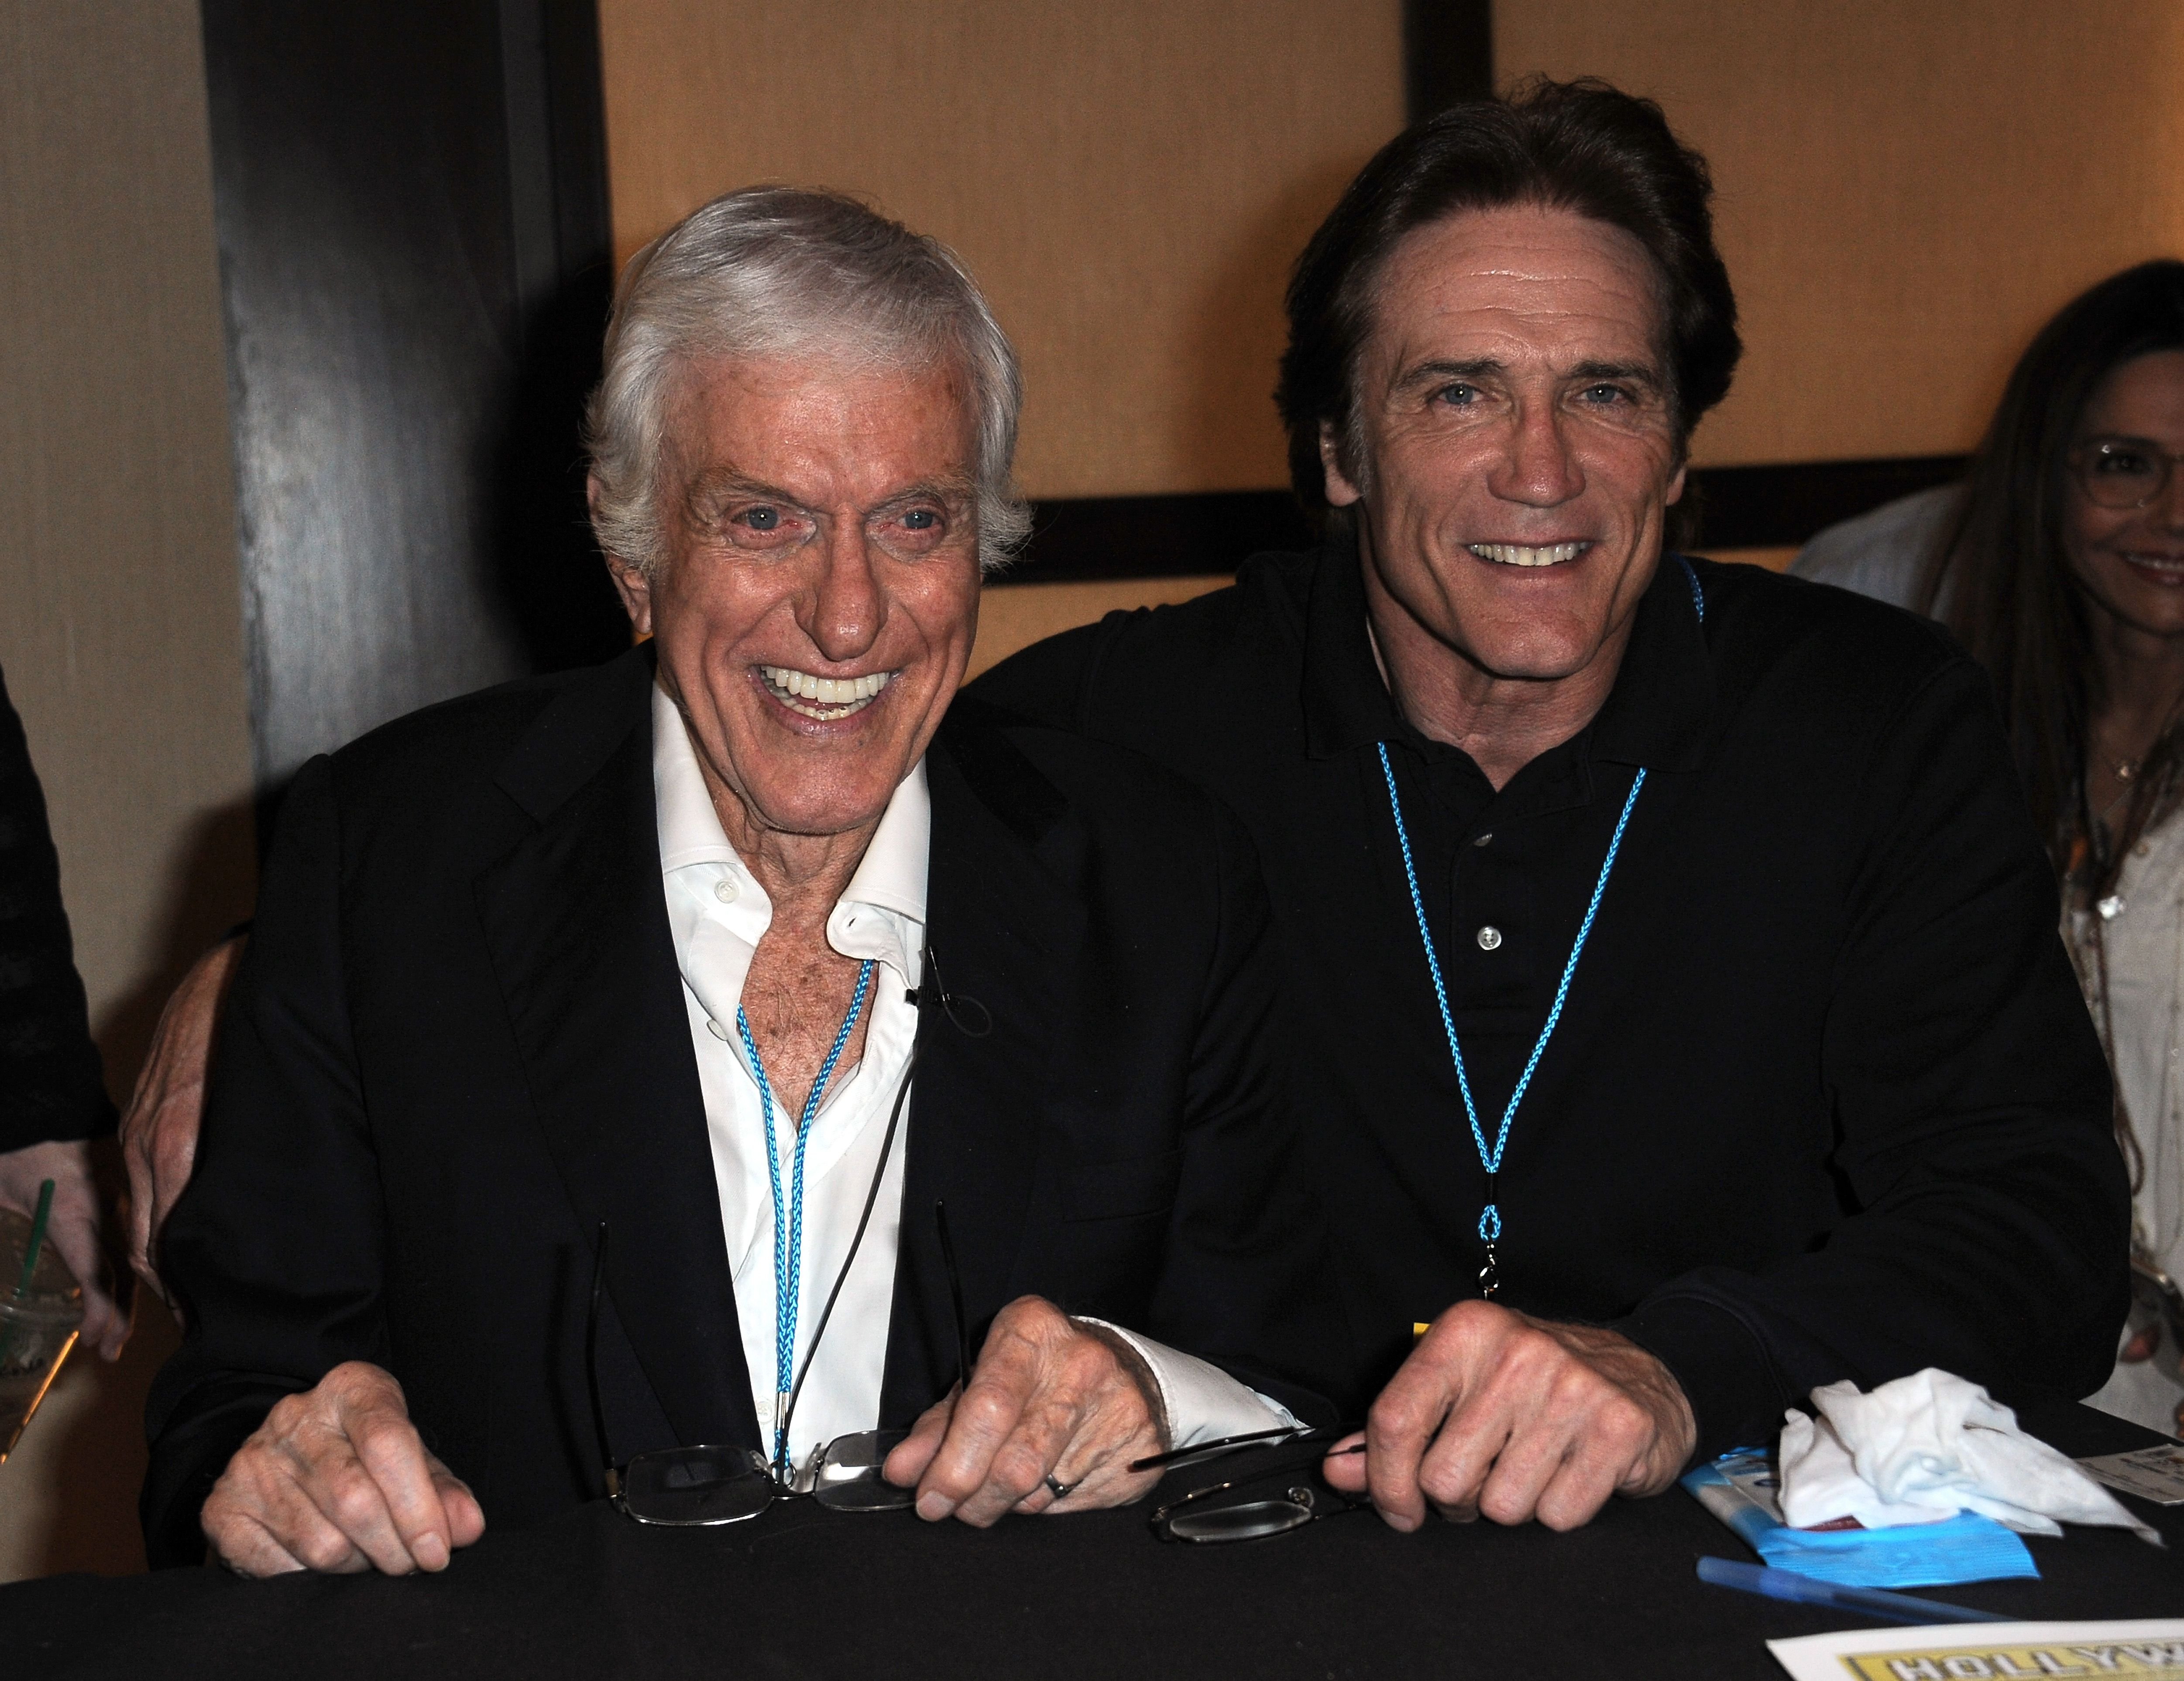 Dick and Barry Van Dyke at The Hollywood Show on January 24, 2015, in Los Angeles, California. | Source: Albert L. Ortega/Getty Images